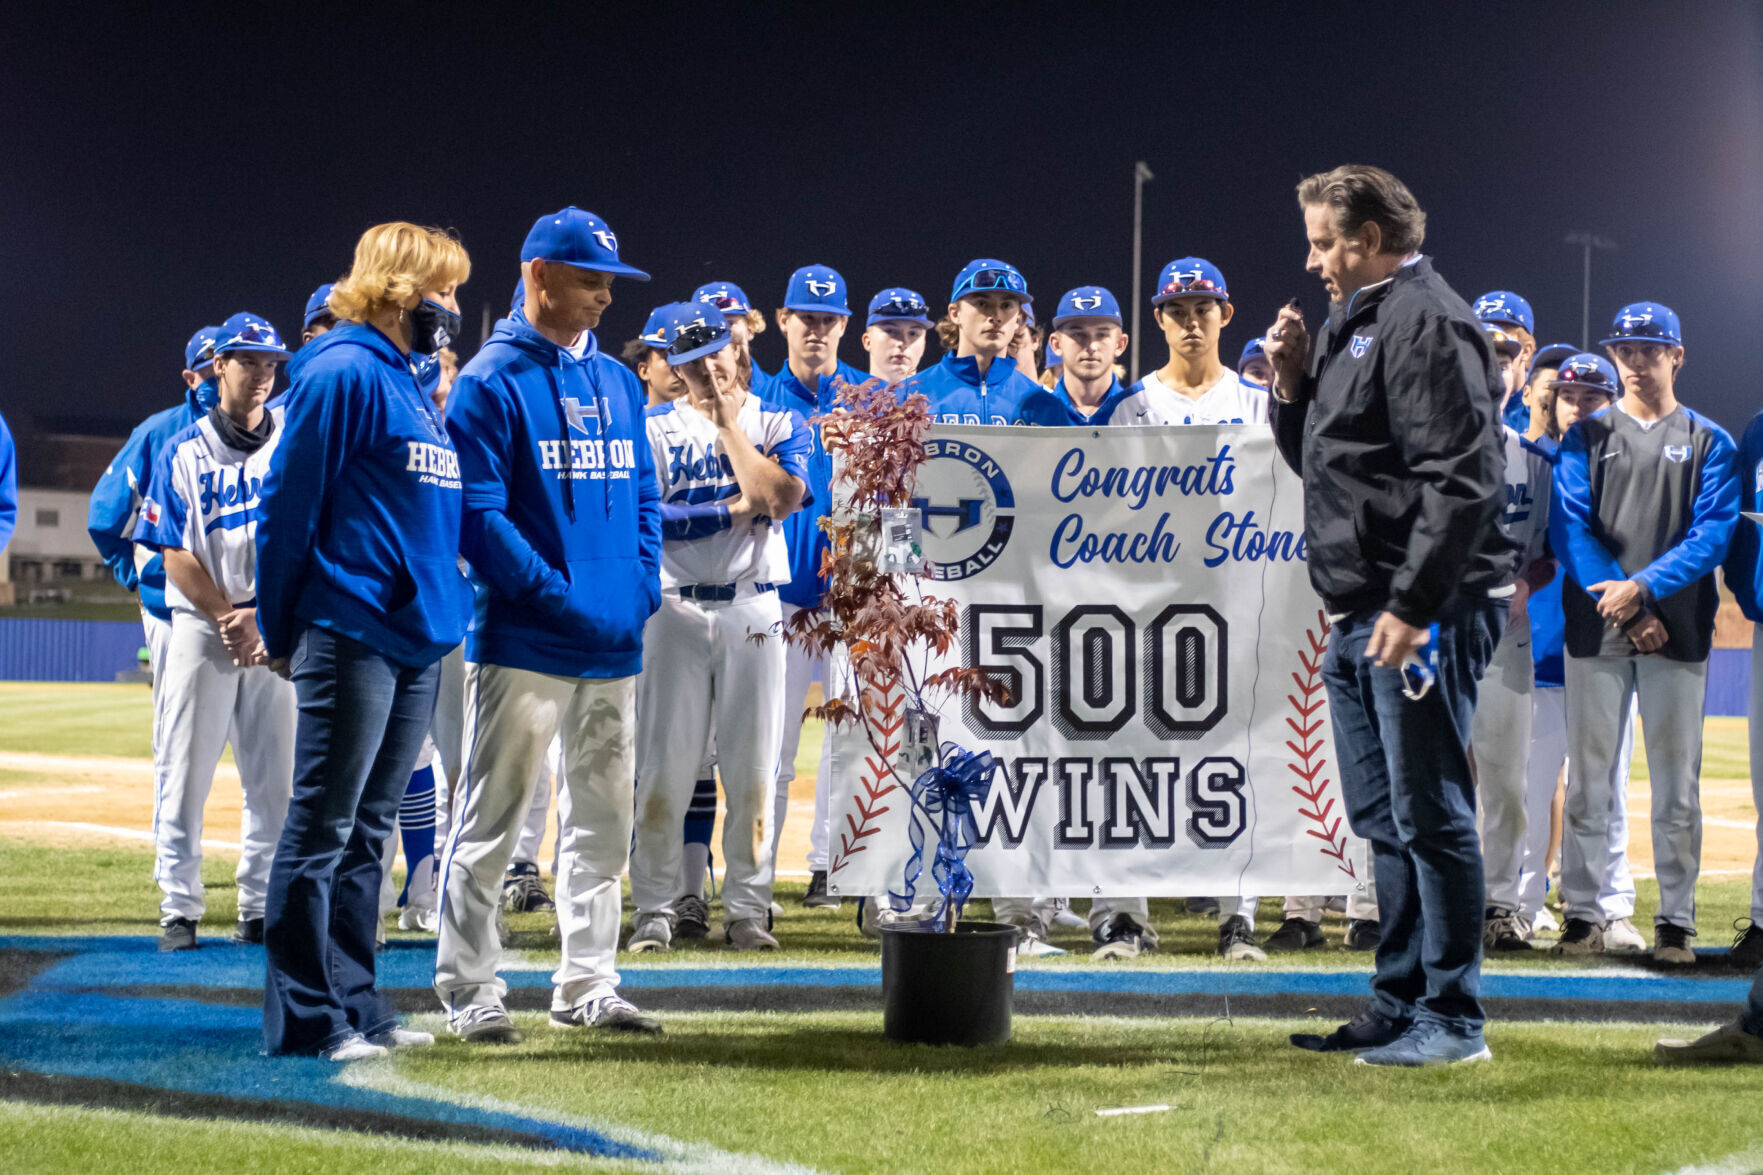 Longtime Hebron baseball coach Stone honored with jersey retirement ceremony